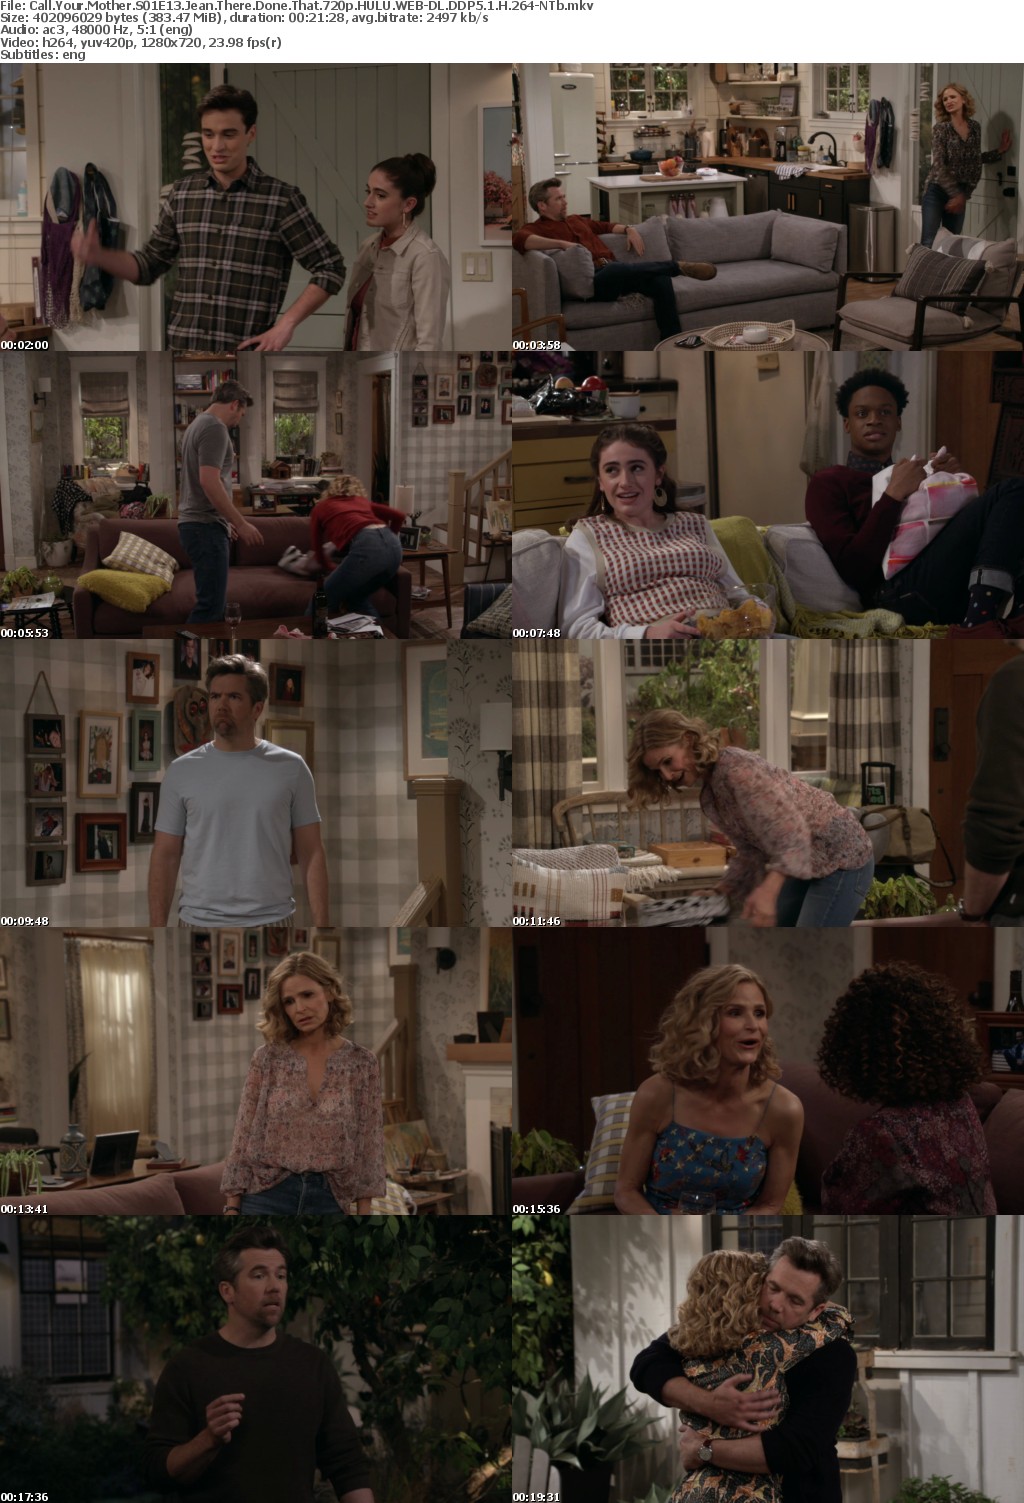 Call Your Mother S01E13 Jean There Done That 720p HULU WEB-DL DDP5 1 H 264-NTb